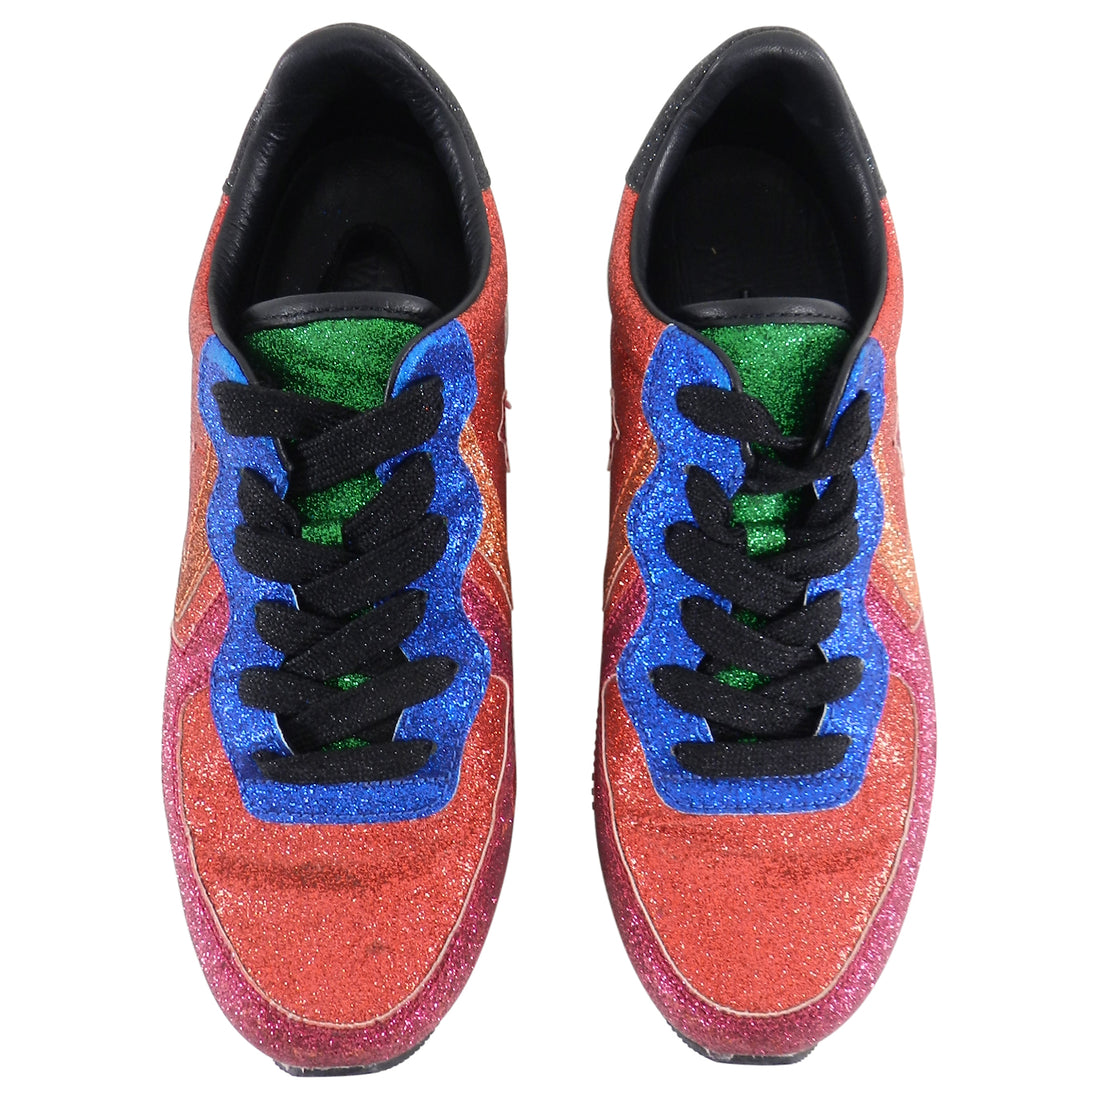 Converse x JW Anderson Thunderbolt Low Glitter Runners - 7.5